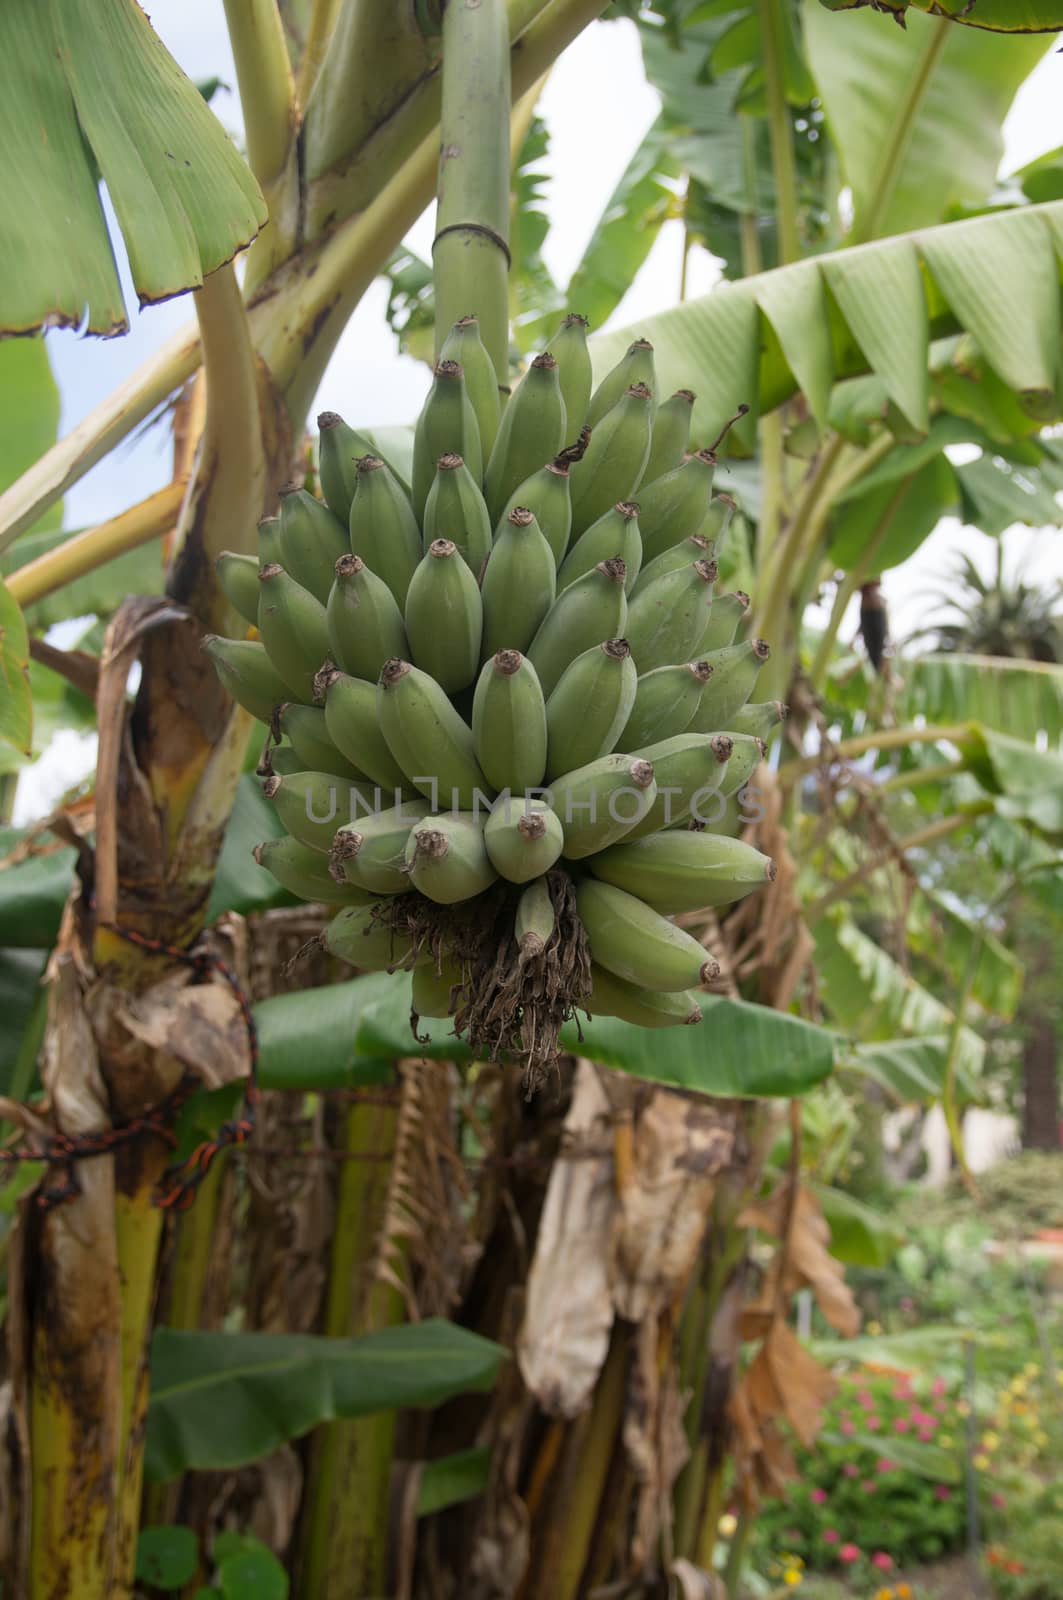 Small green bananas on the tree by emattil